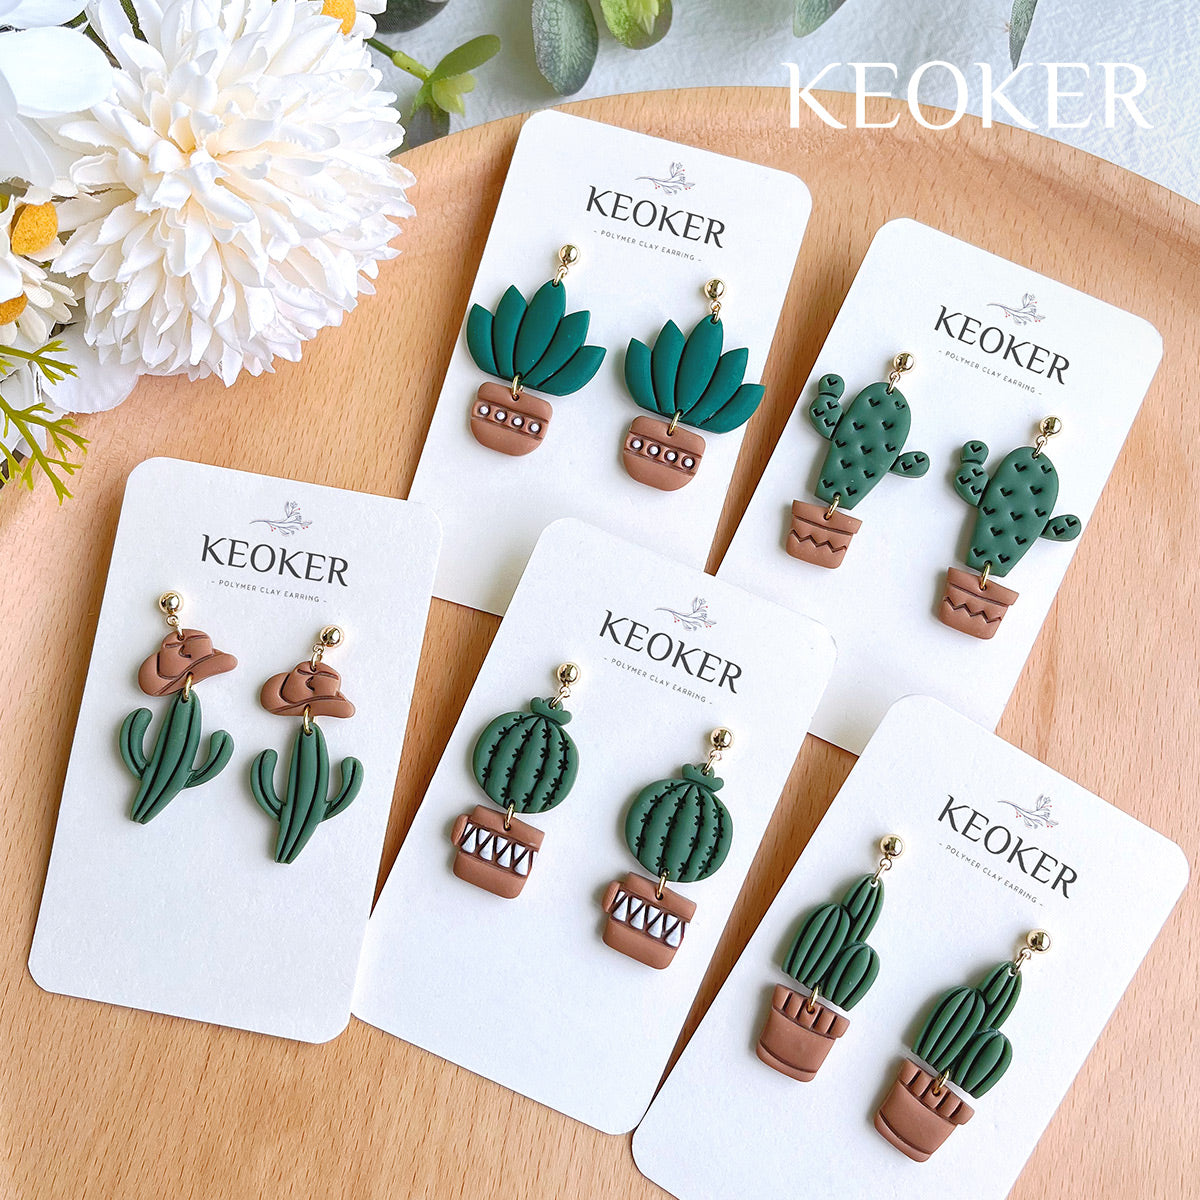 KEOKER Clay Cutters for Polymer Clay Jewelry(Potted Plant Clay Cutters